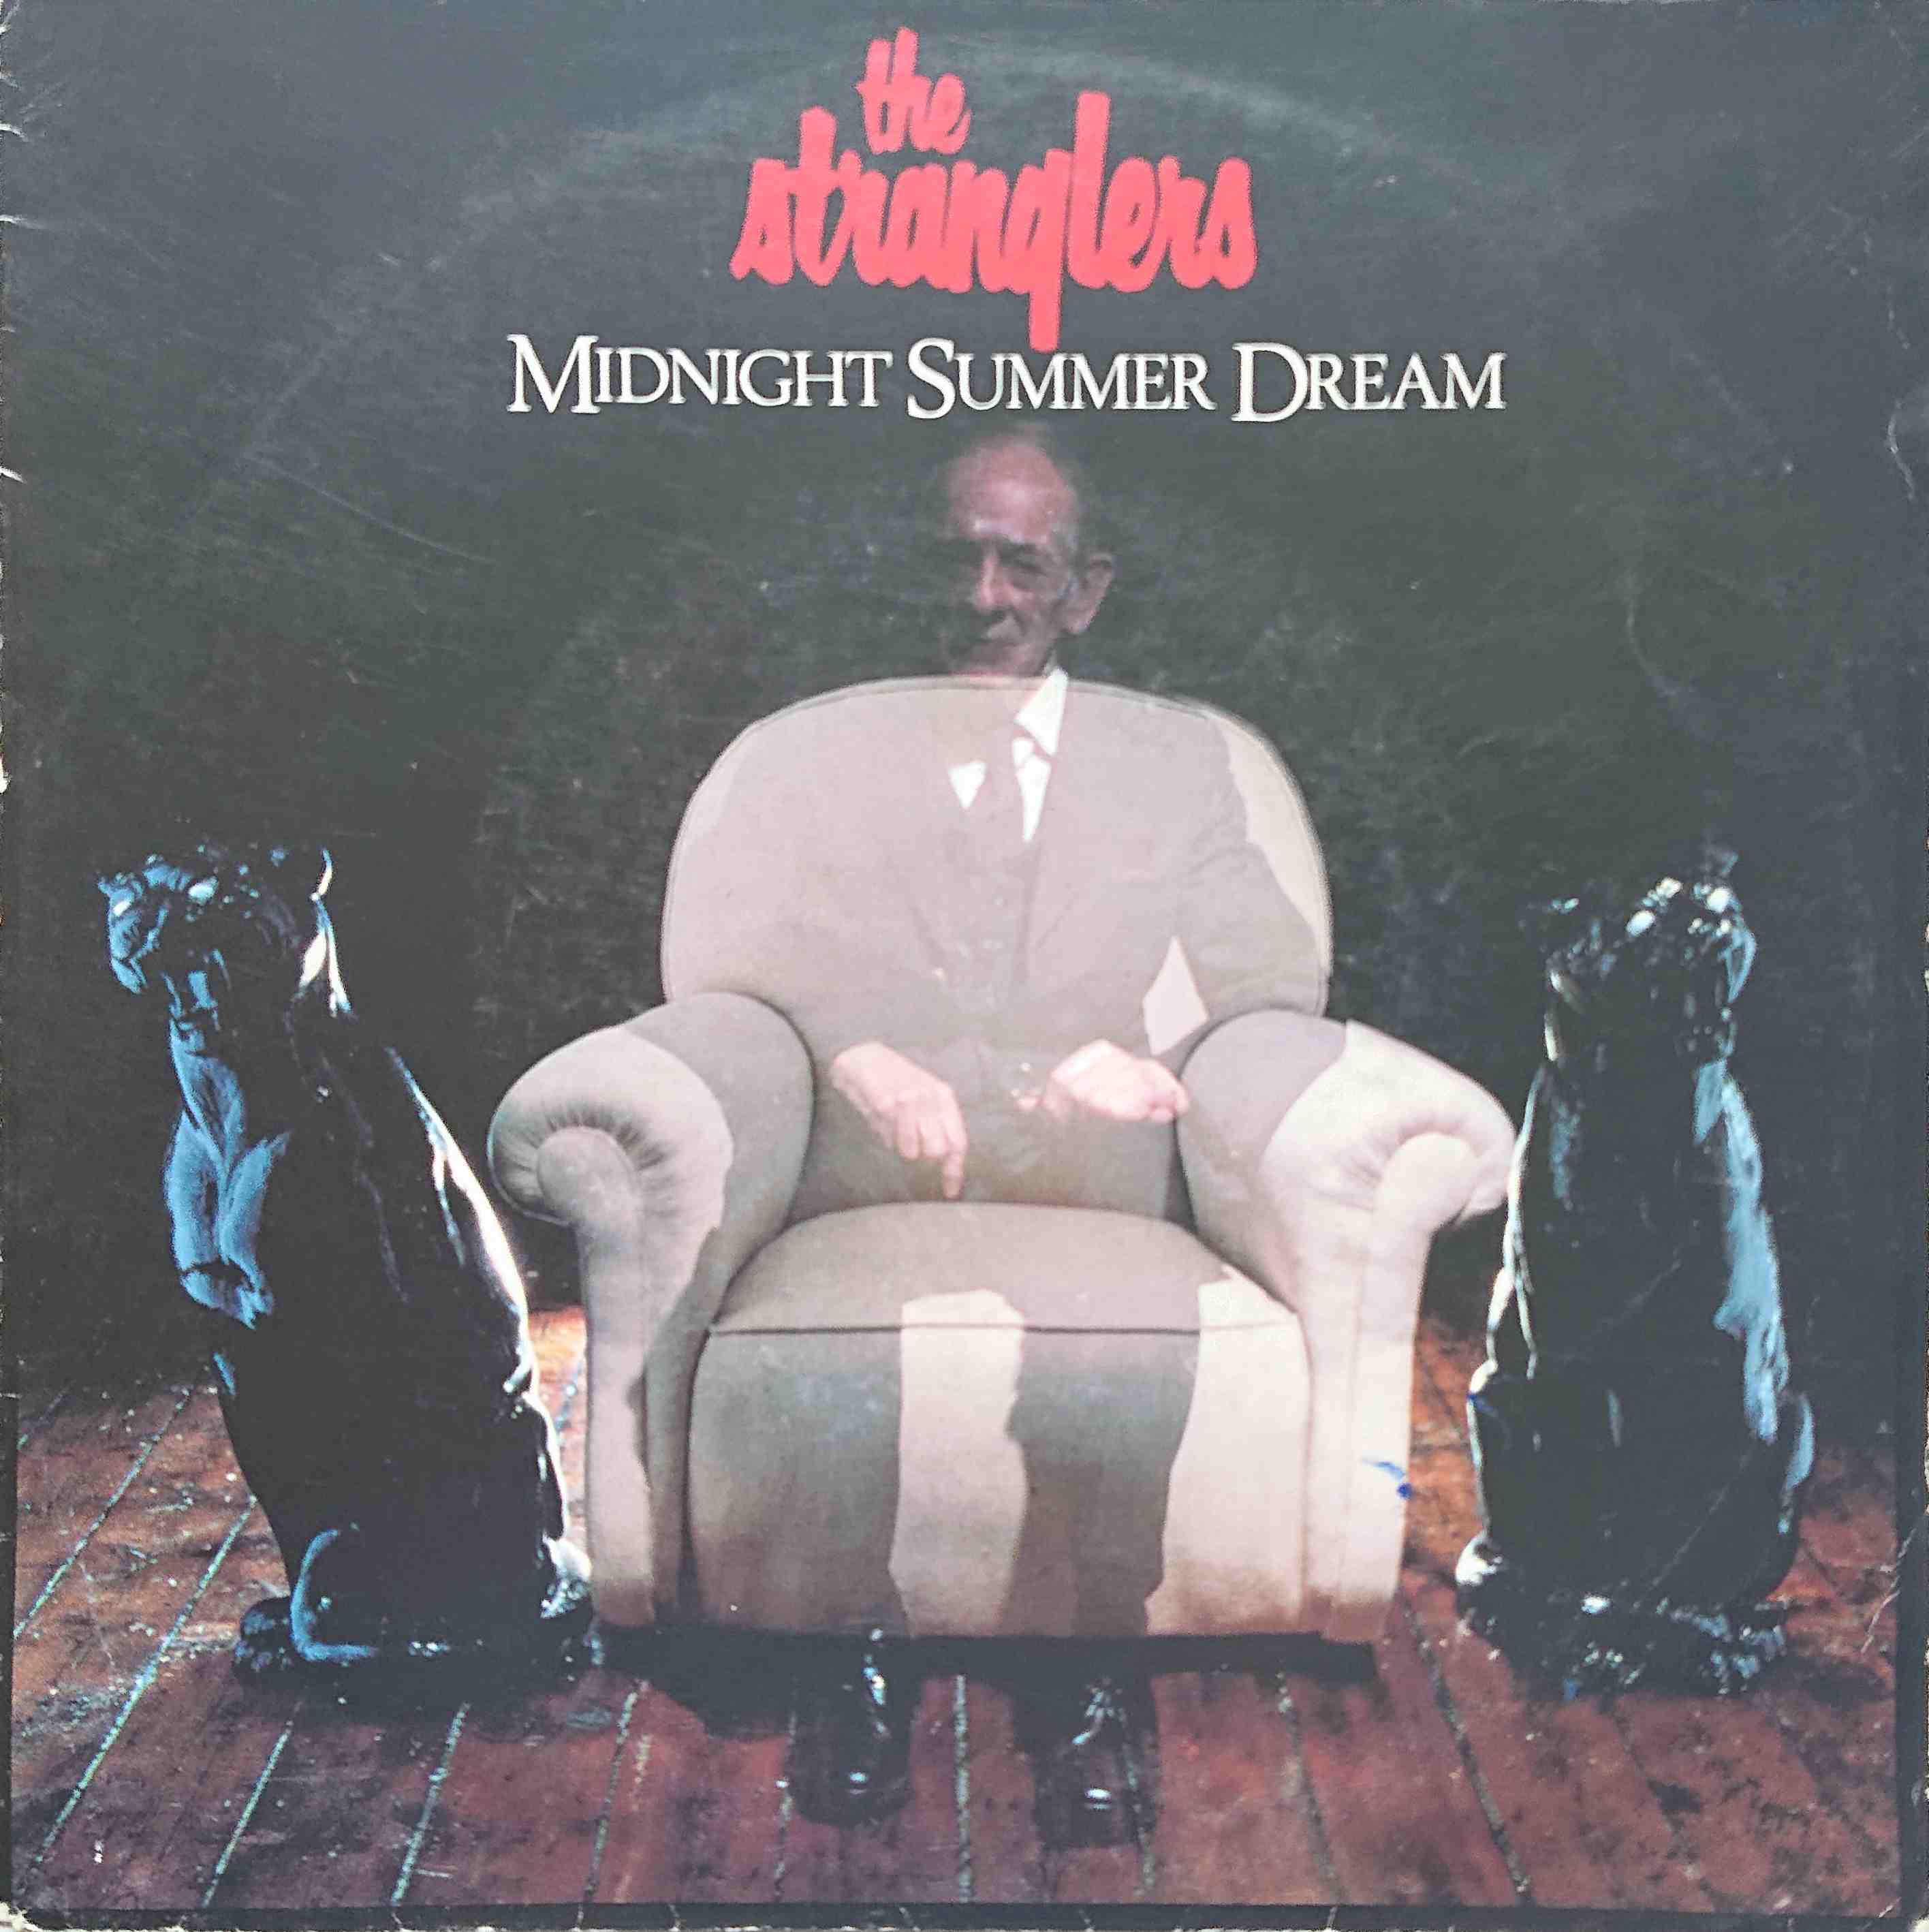 Picture of Midnight summer dream by artist The Stranglers from The Stranglers singles